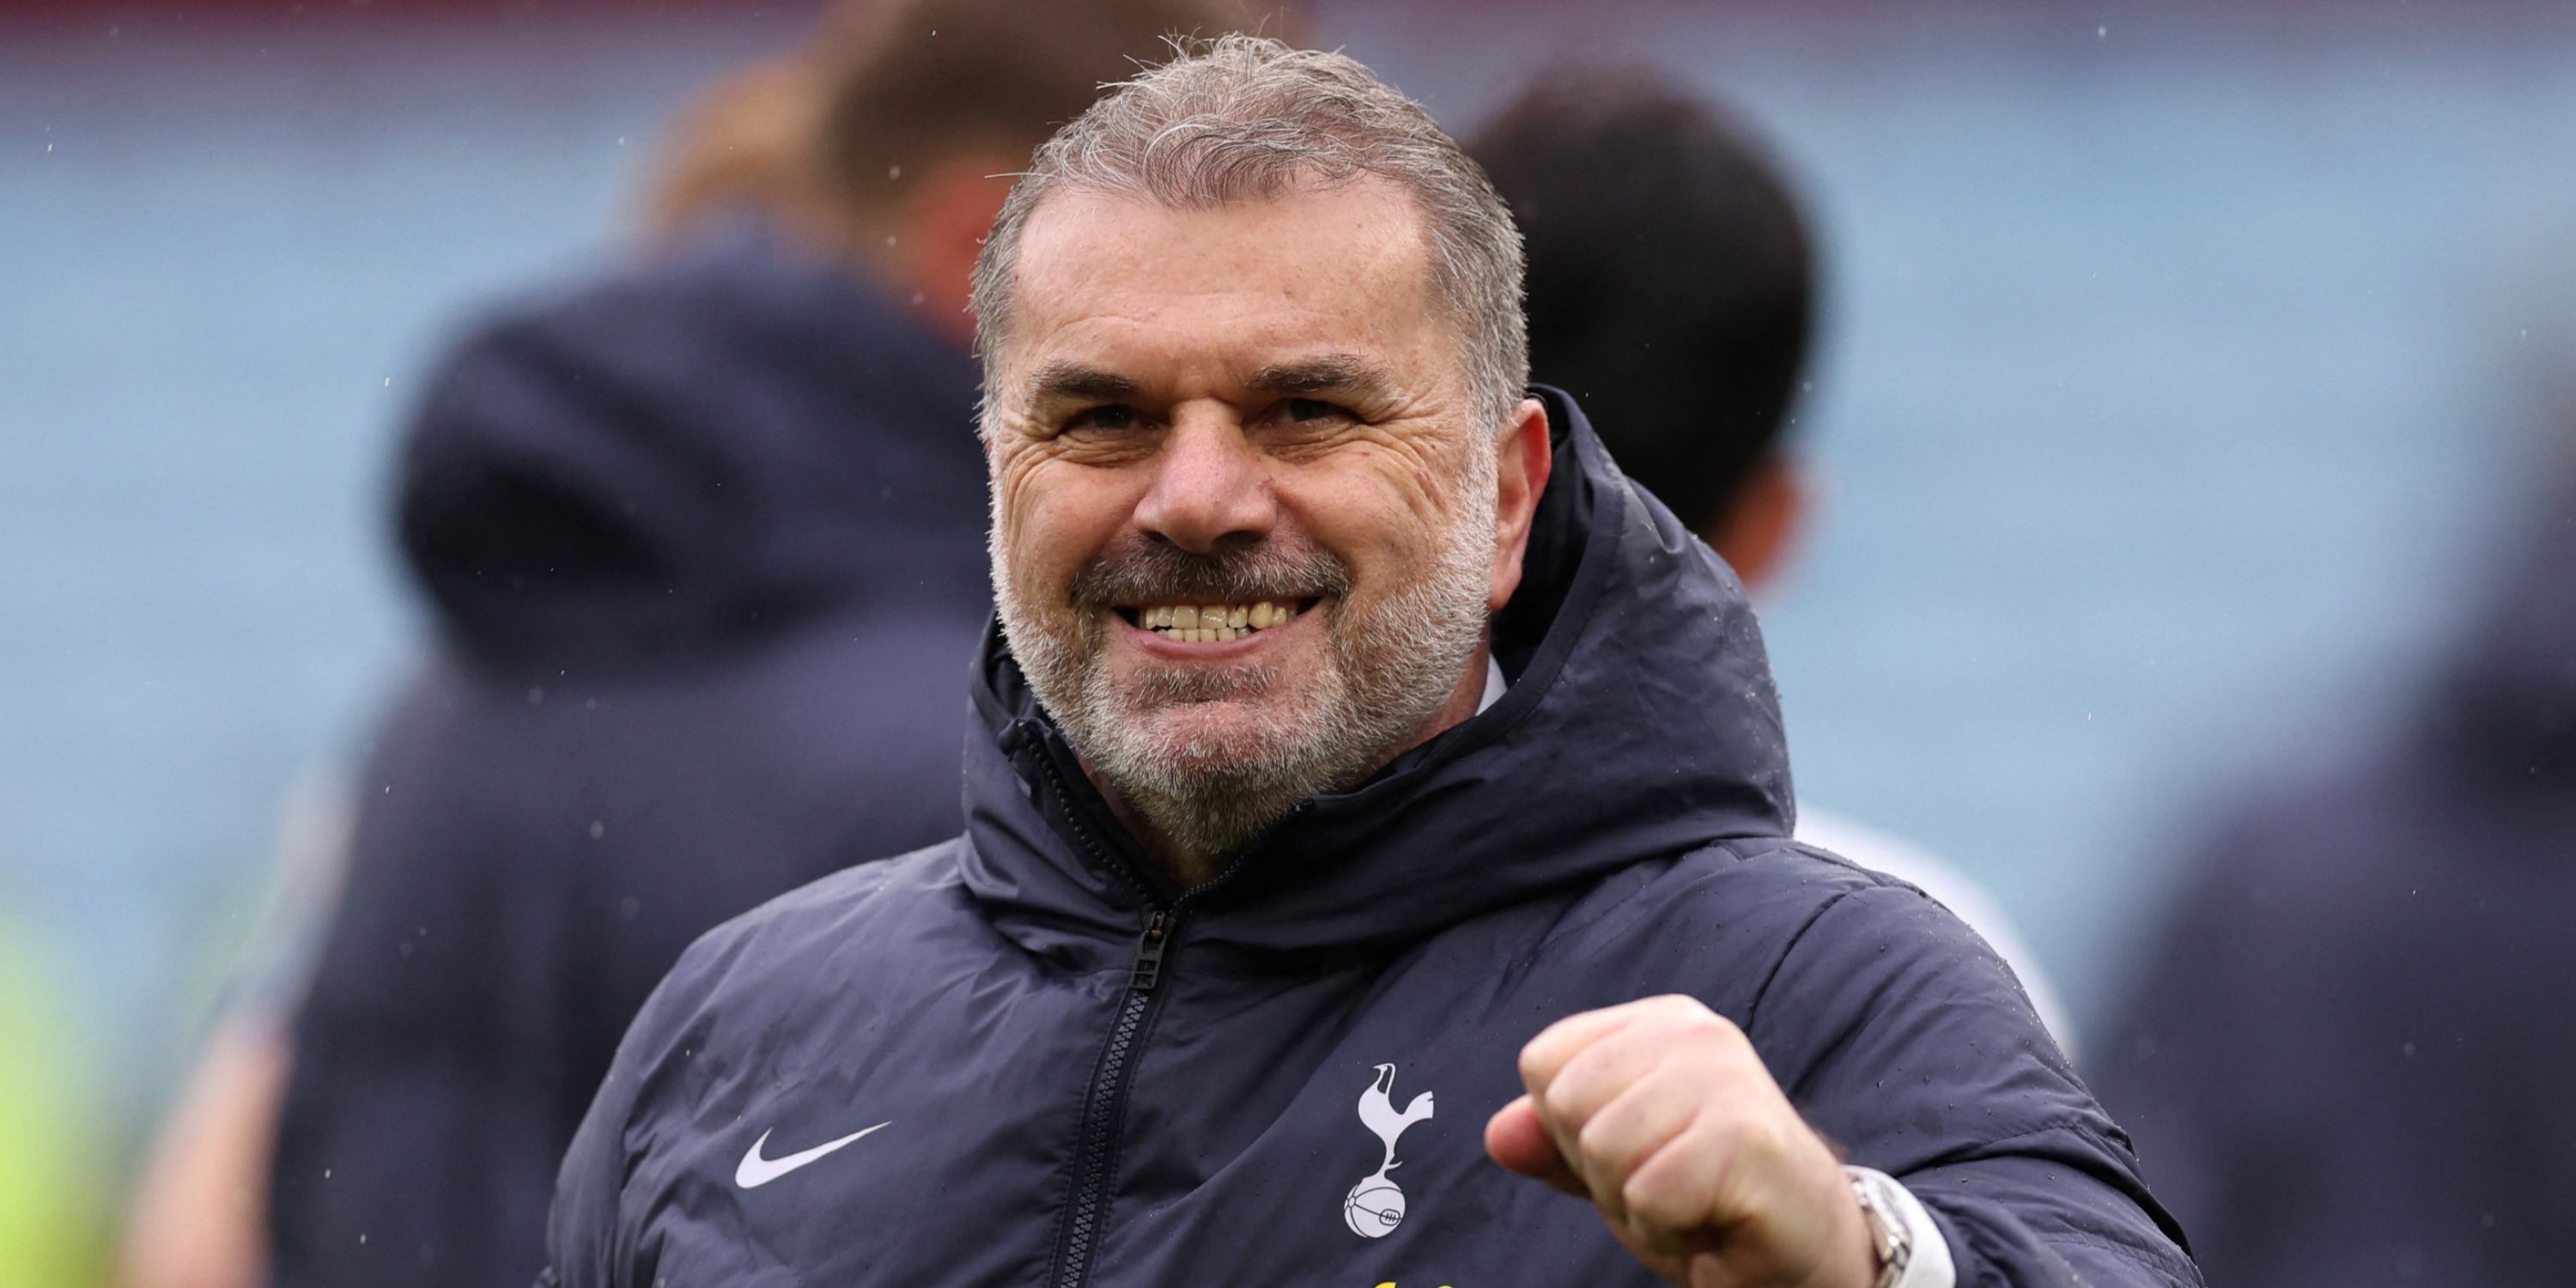 ange favourite at tottenham slammed as one of the worst in premier league